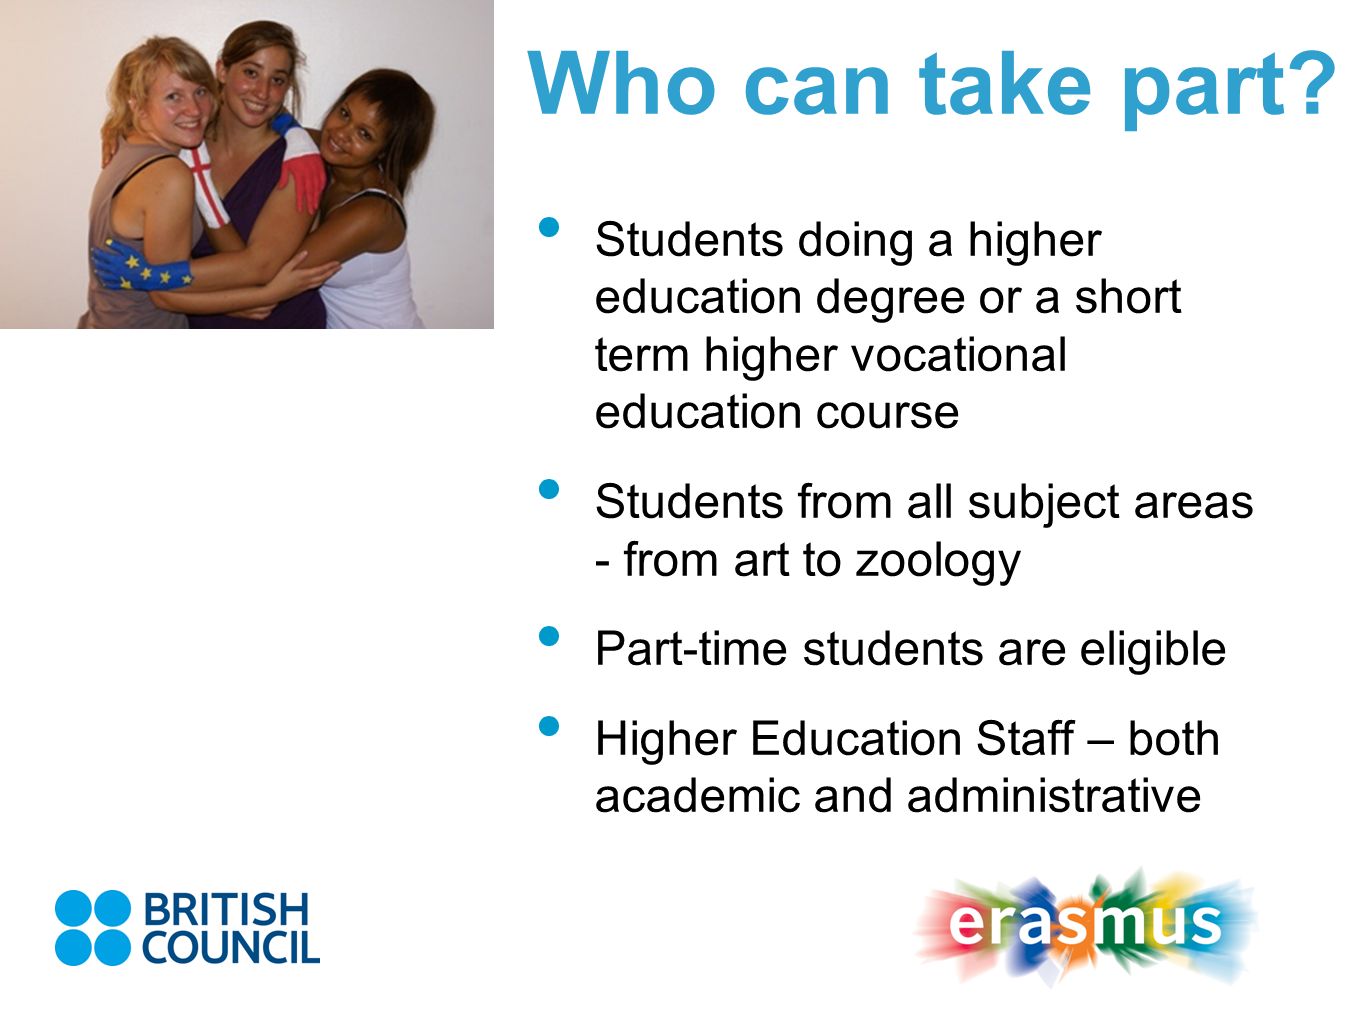 Who can take part Students doing a higher education degree or a short term higher vocational education course.